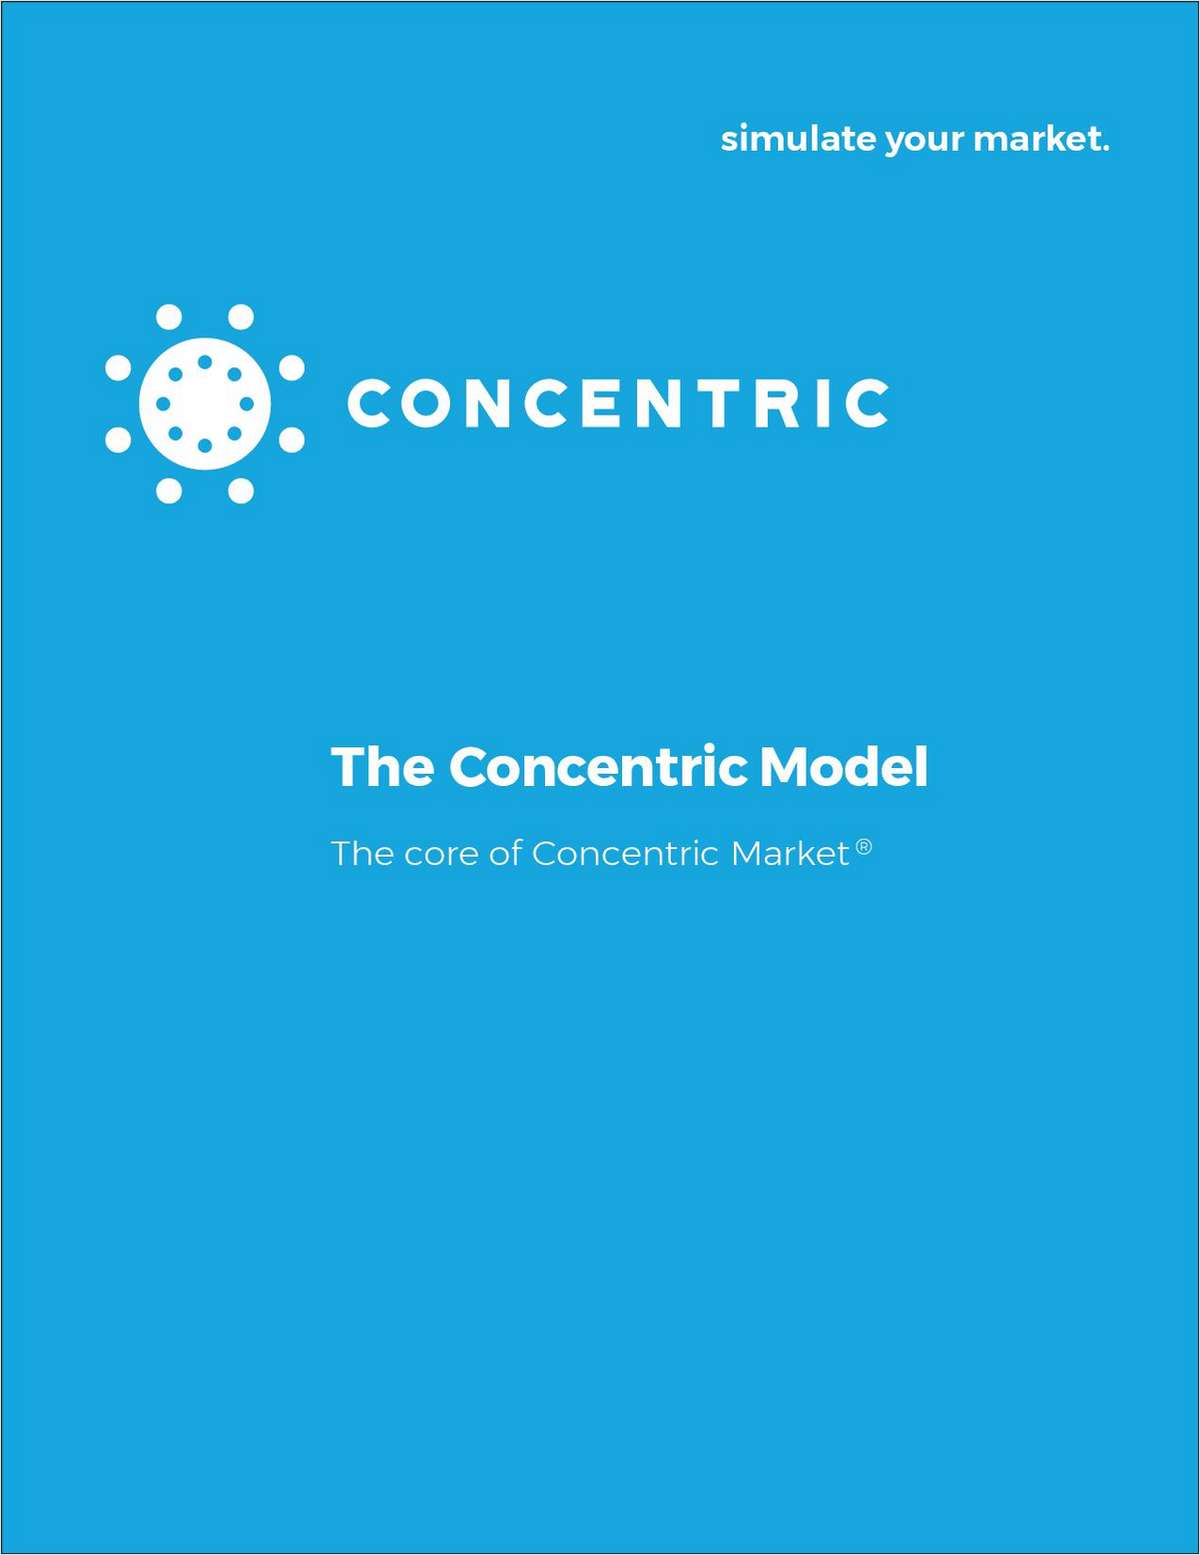 The Concentric Model: The Core of Concentric Market